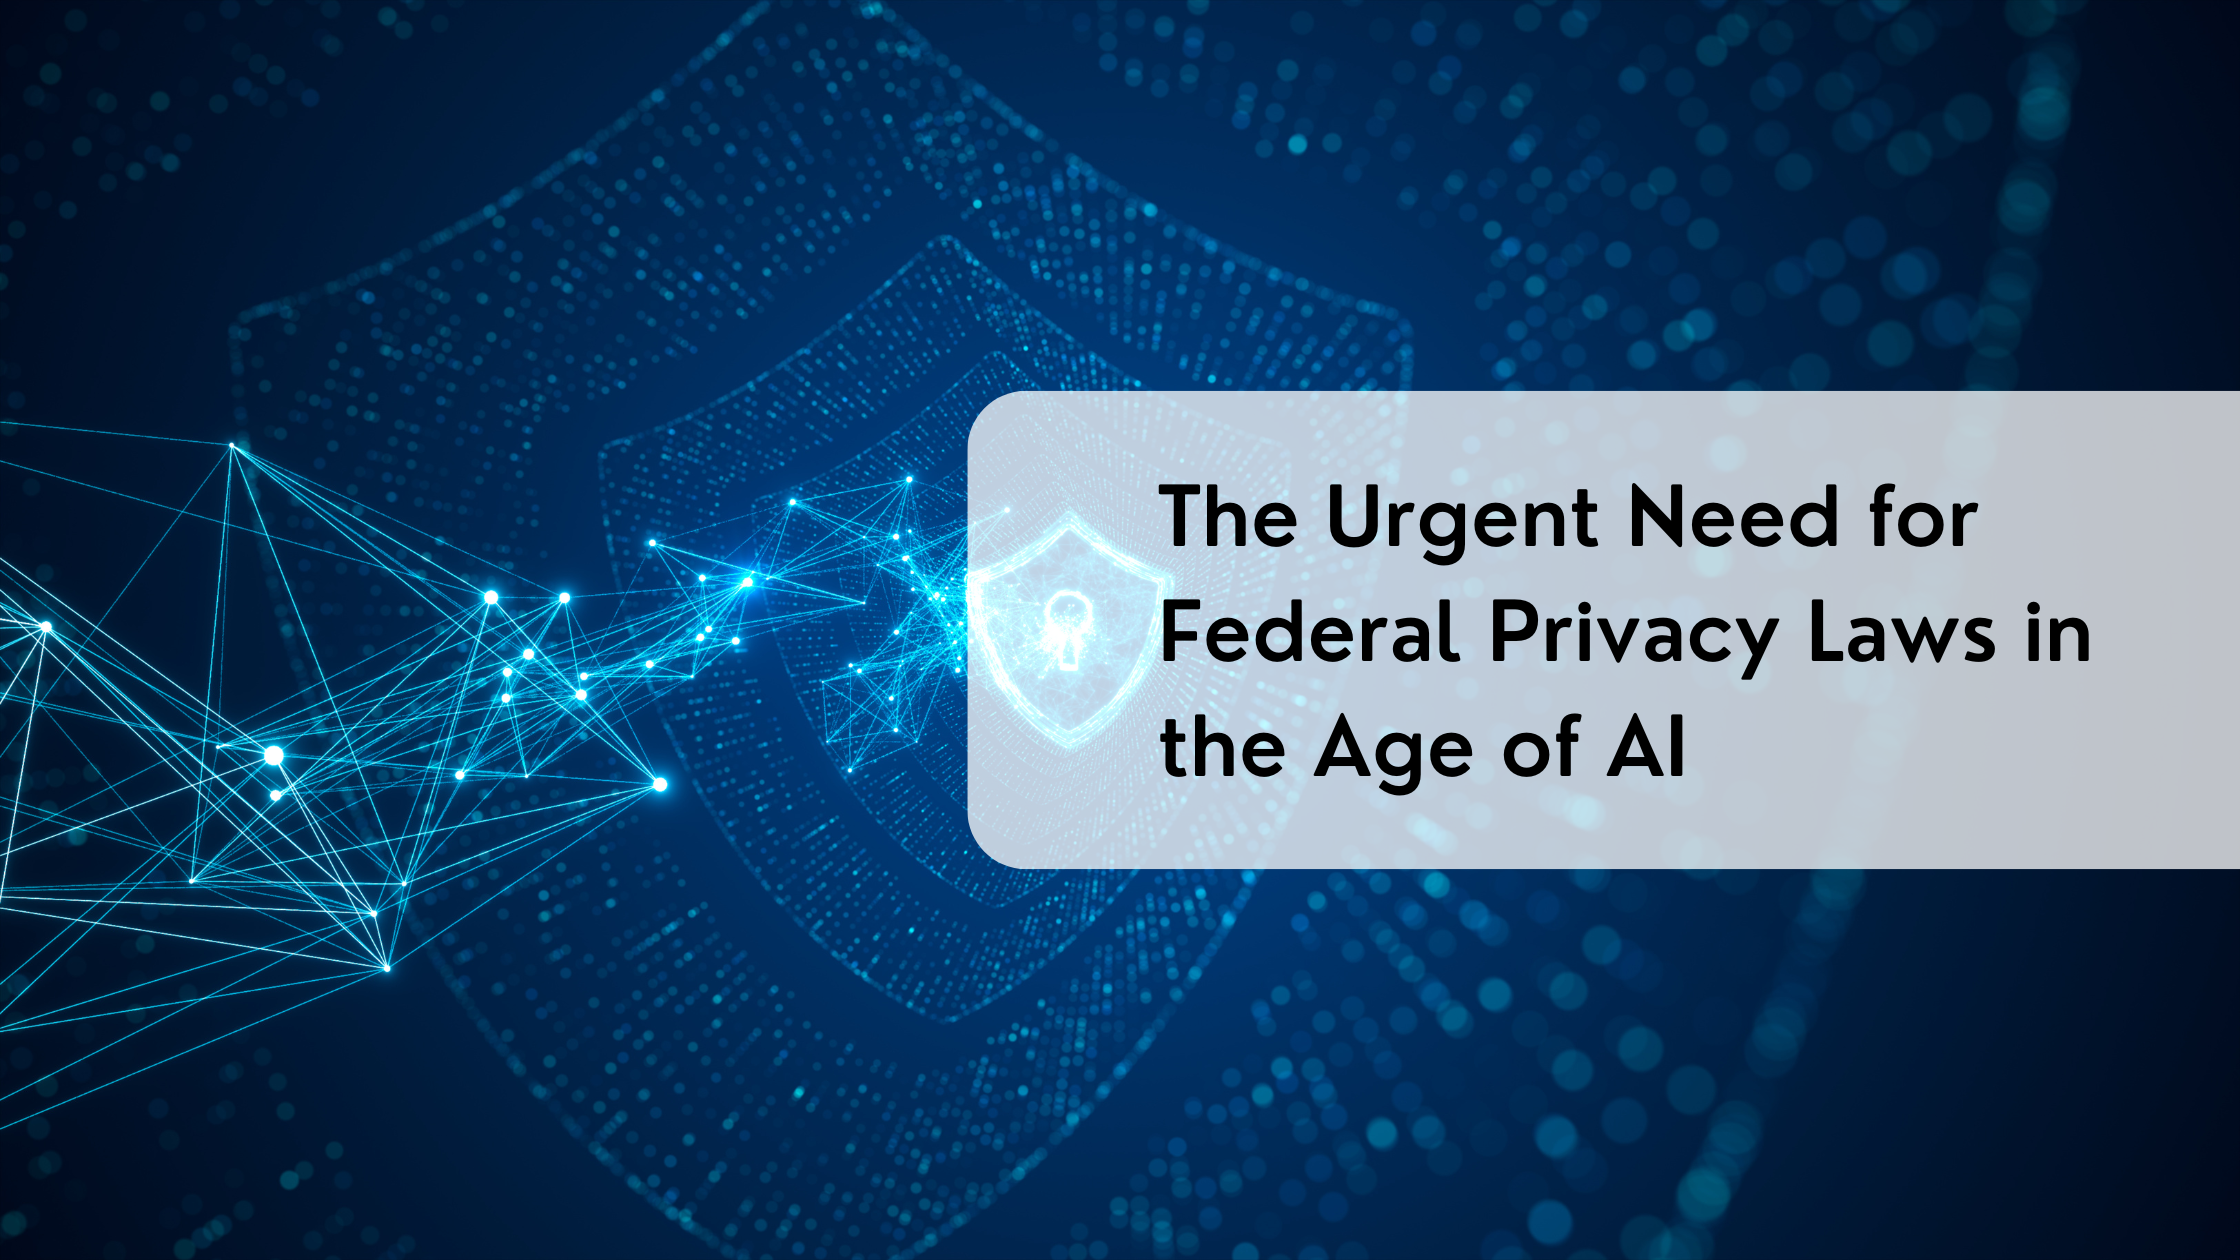 The Urgent Need for Federal Privacy Laws in the Age of AI